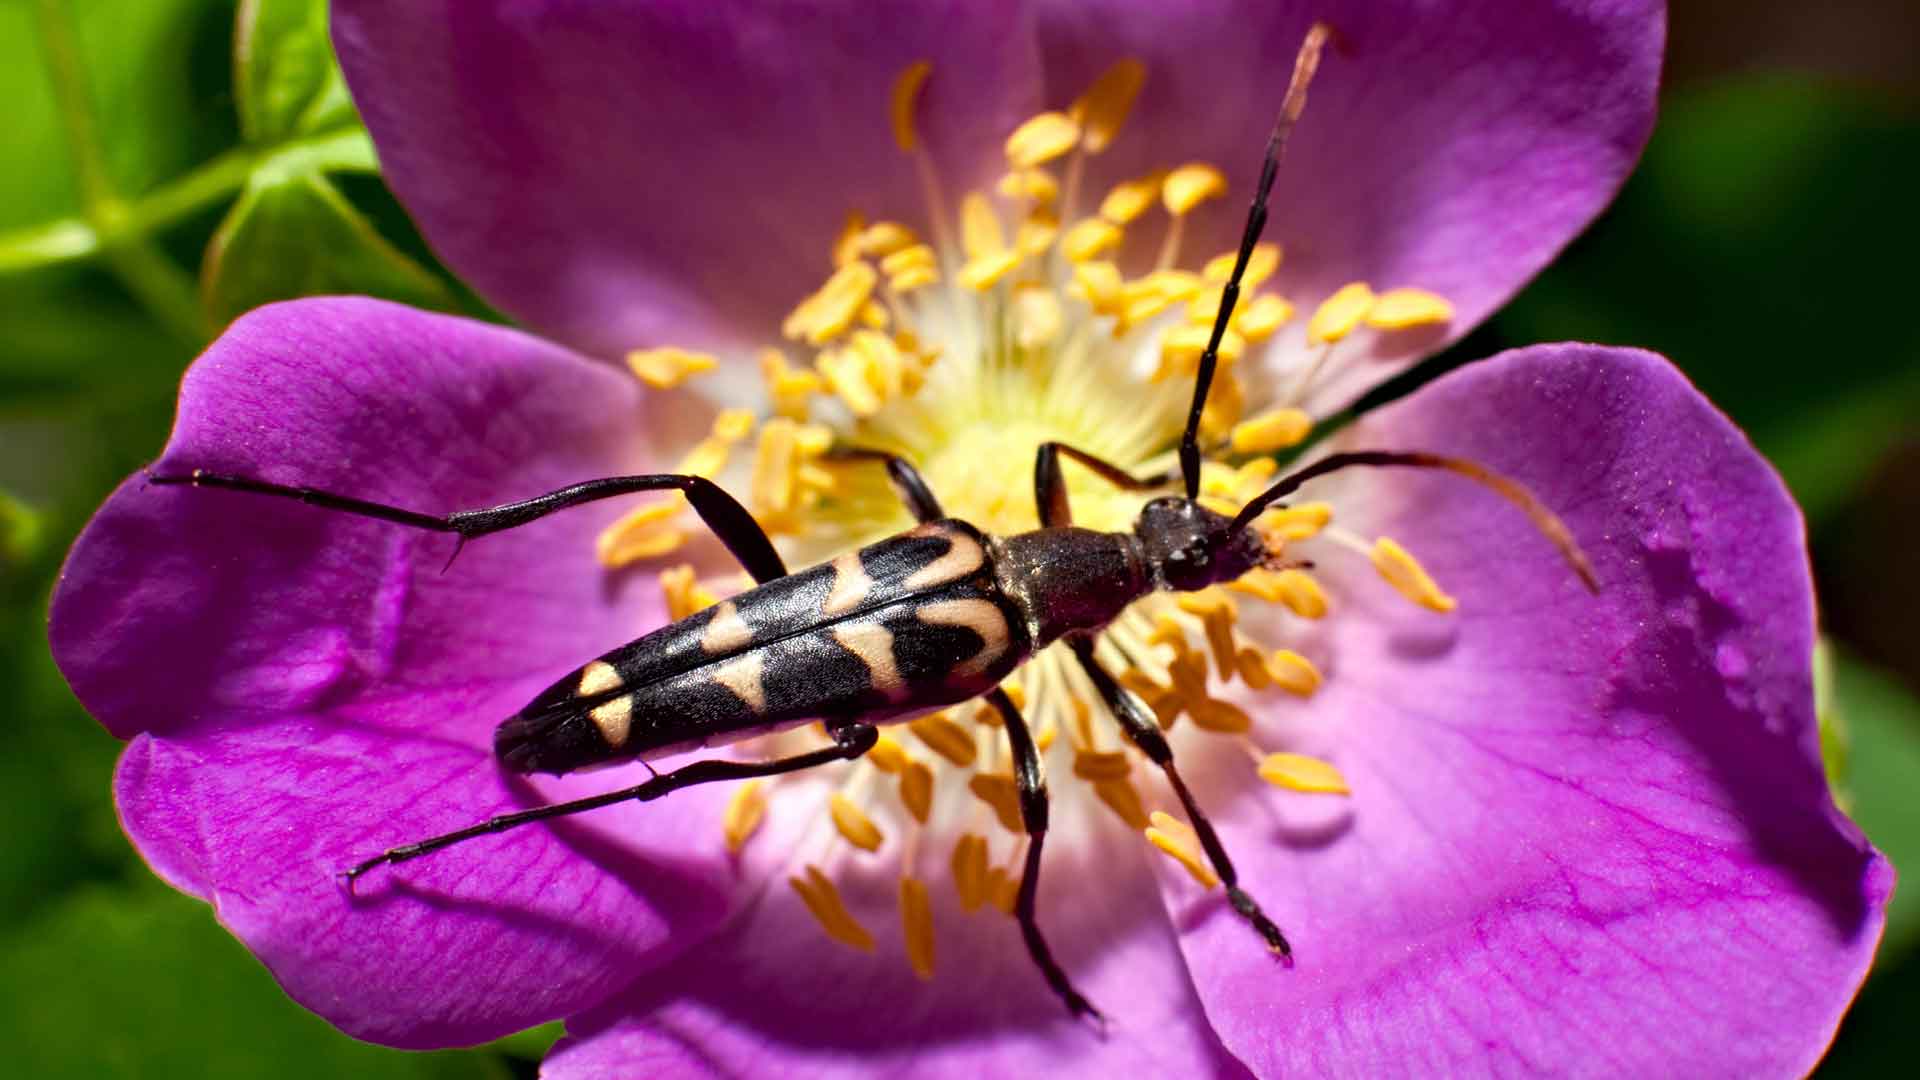 Black and yellow bug on a purple flower